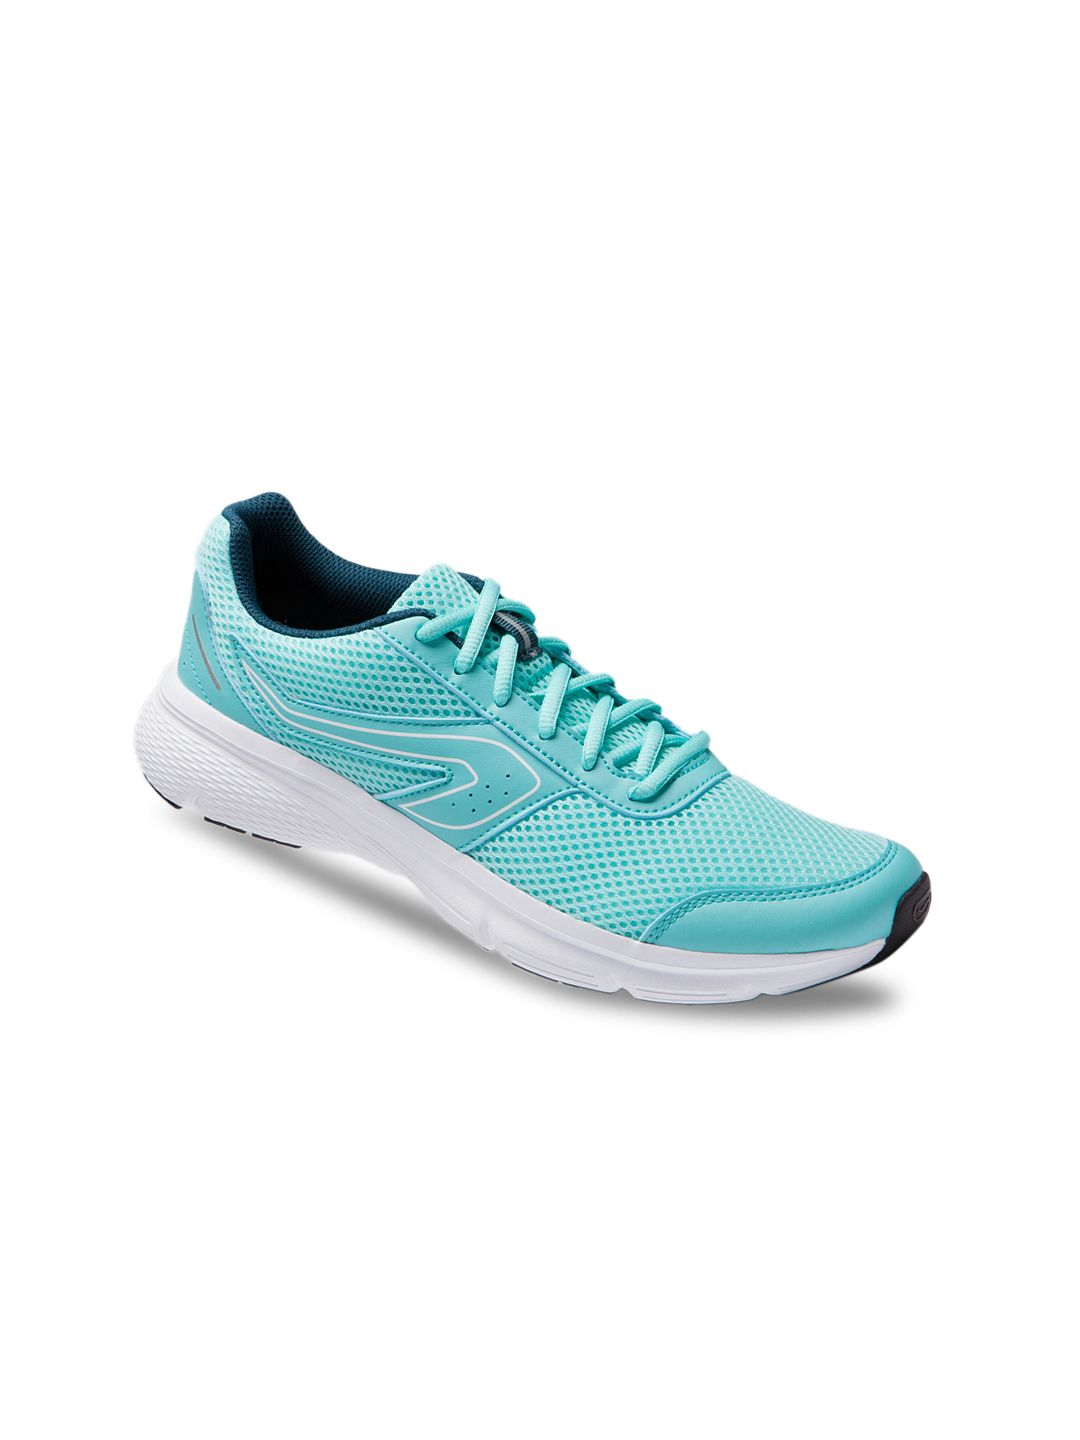 Kalenji By Decathlon Women Green Sports Shoes Price in India